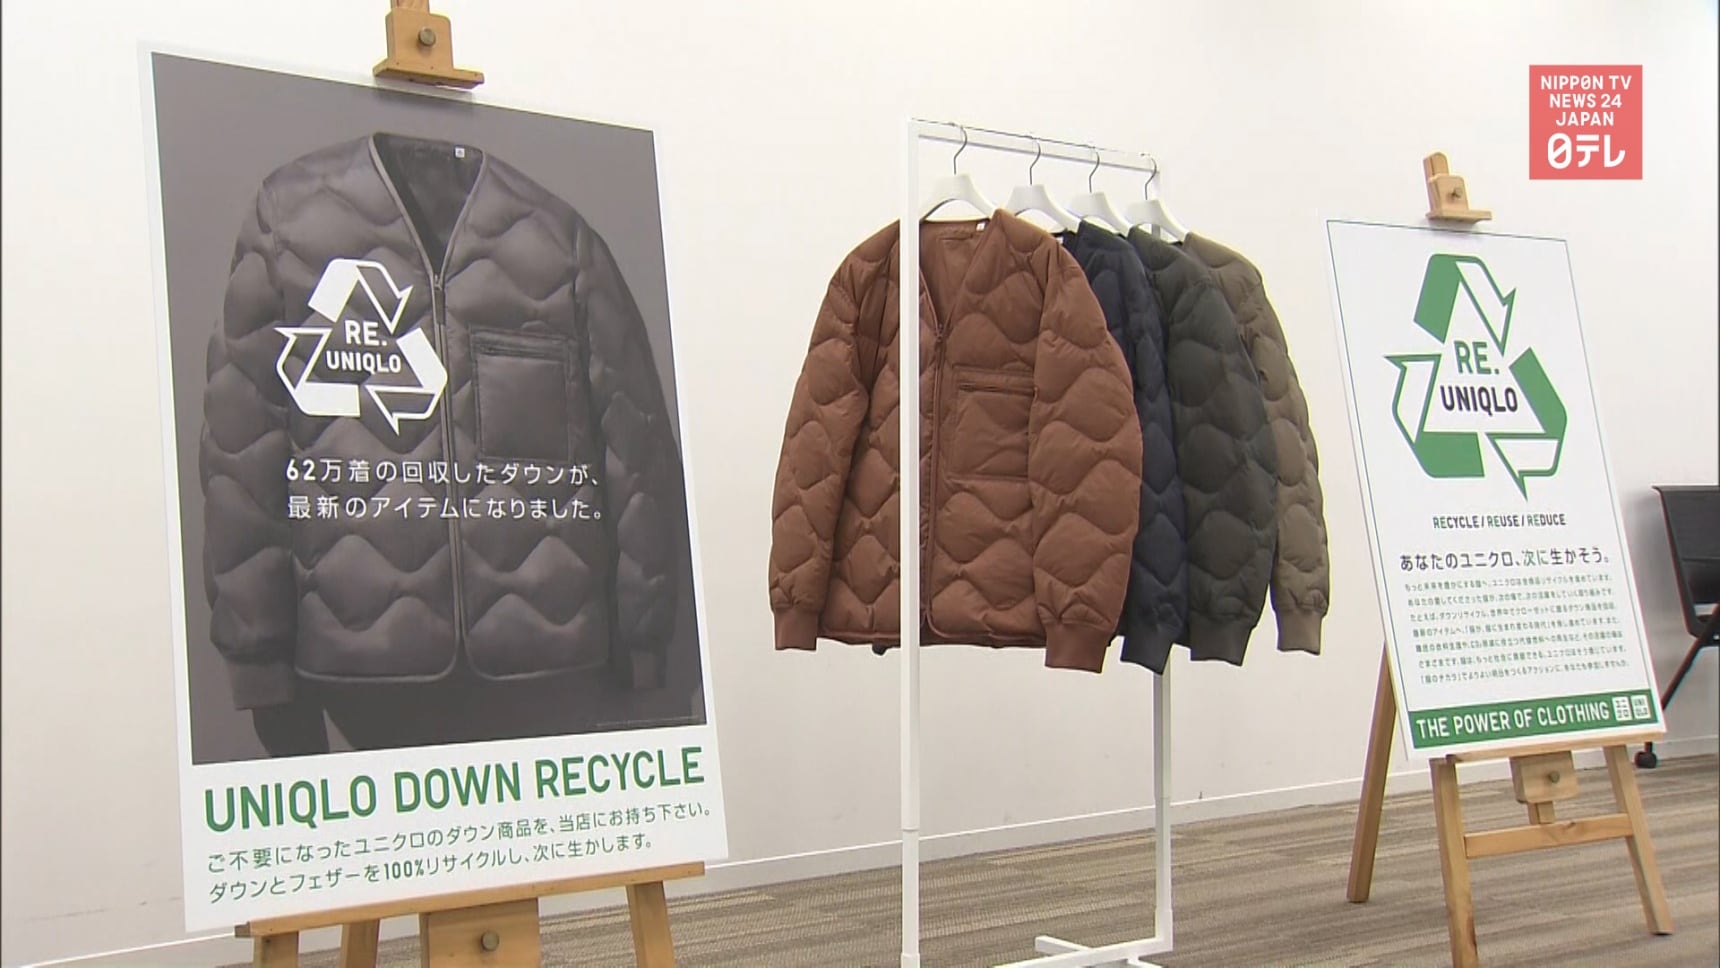 Uniqlo Launching Line of Recycled Jackets | All About Japan